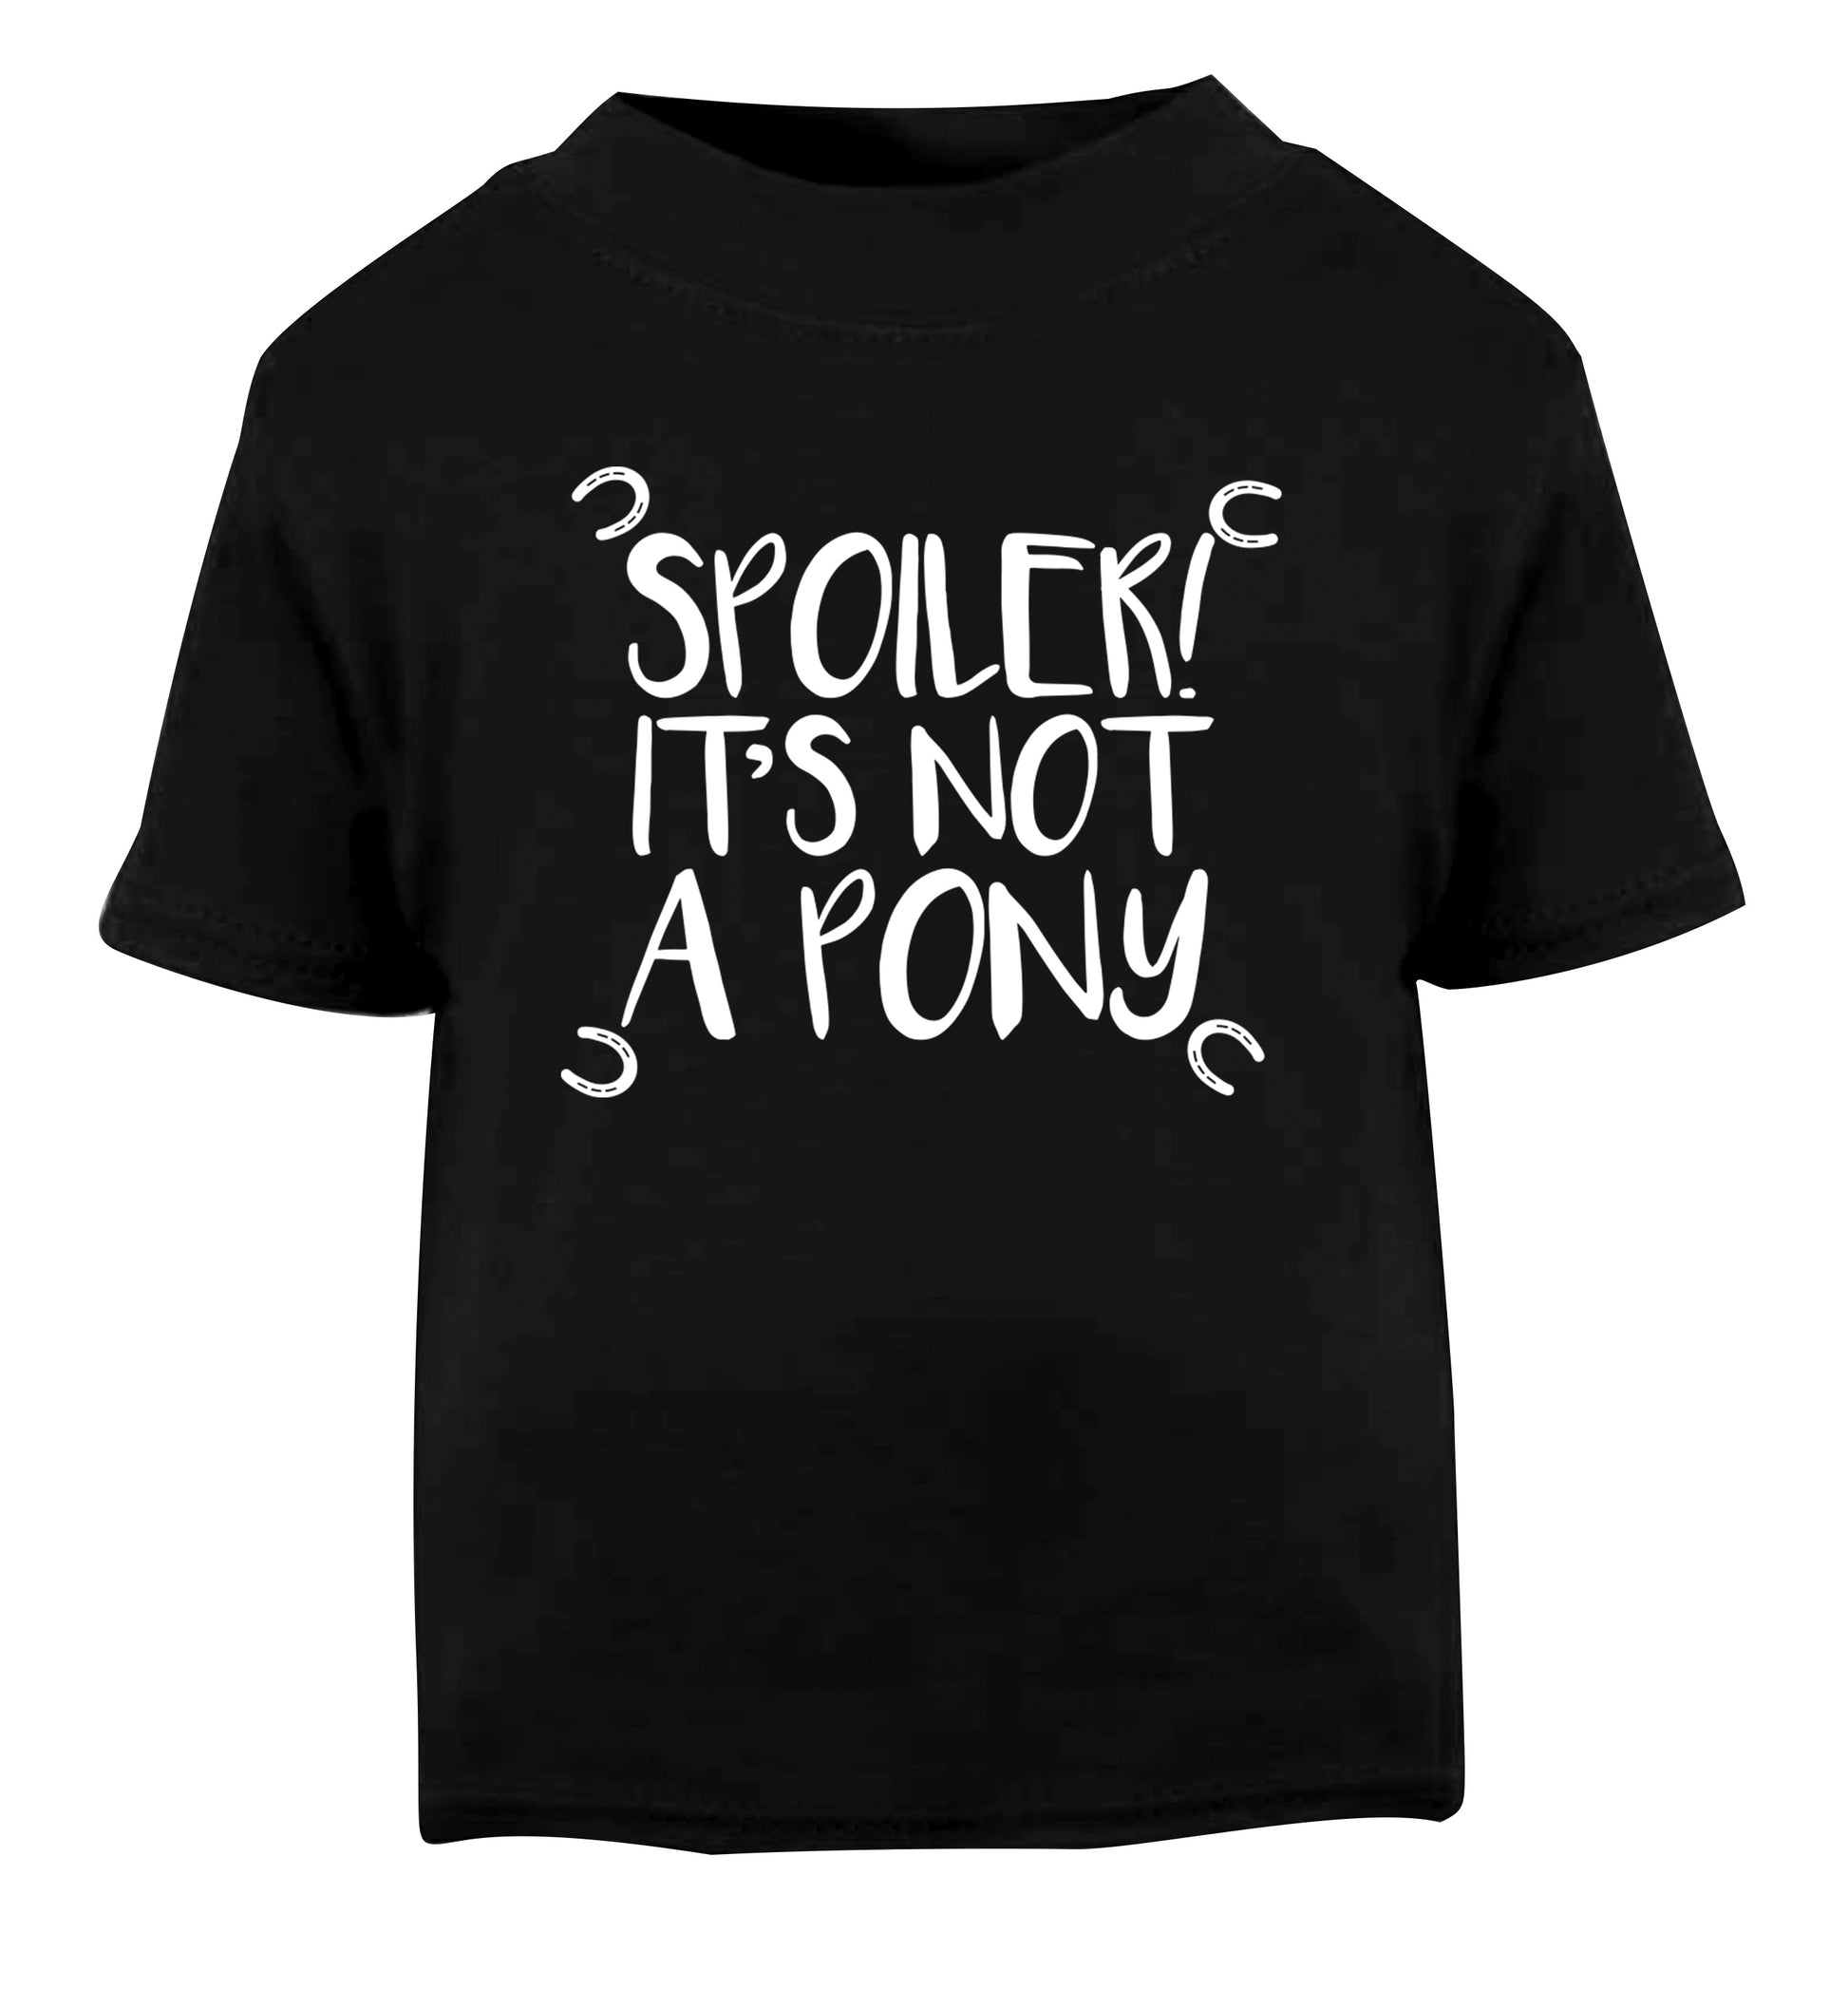 Spoiler it's not a pony Black Baby Toddler Tshirt 2 years